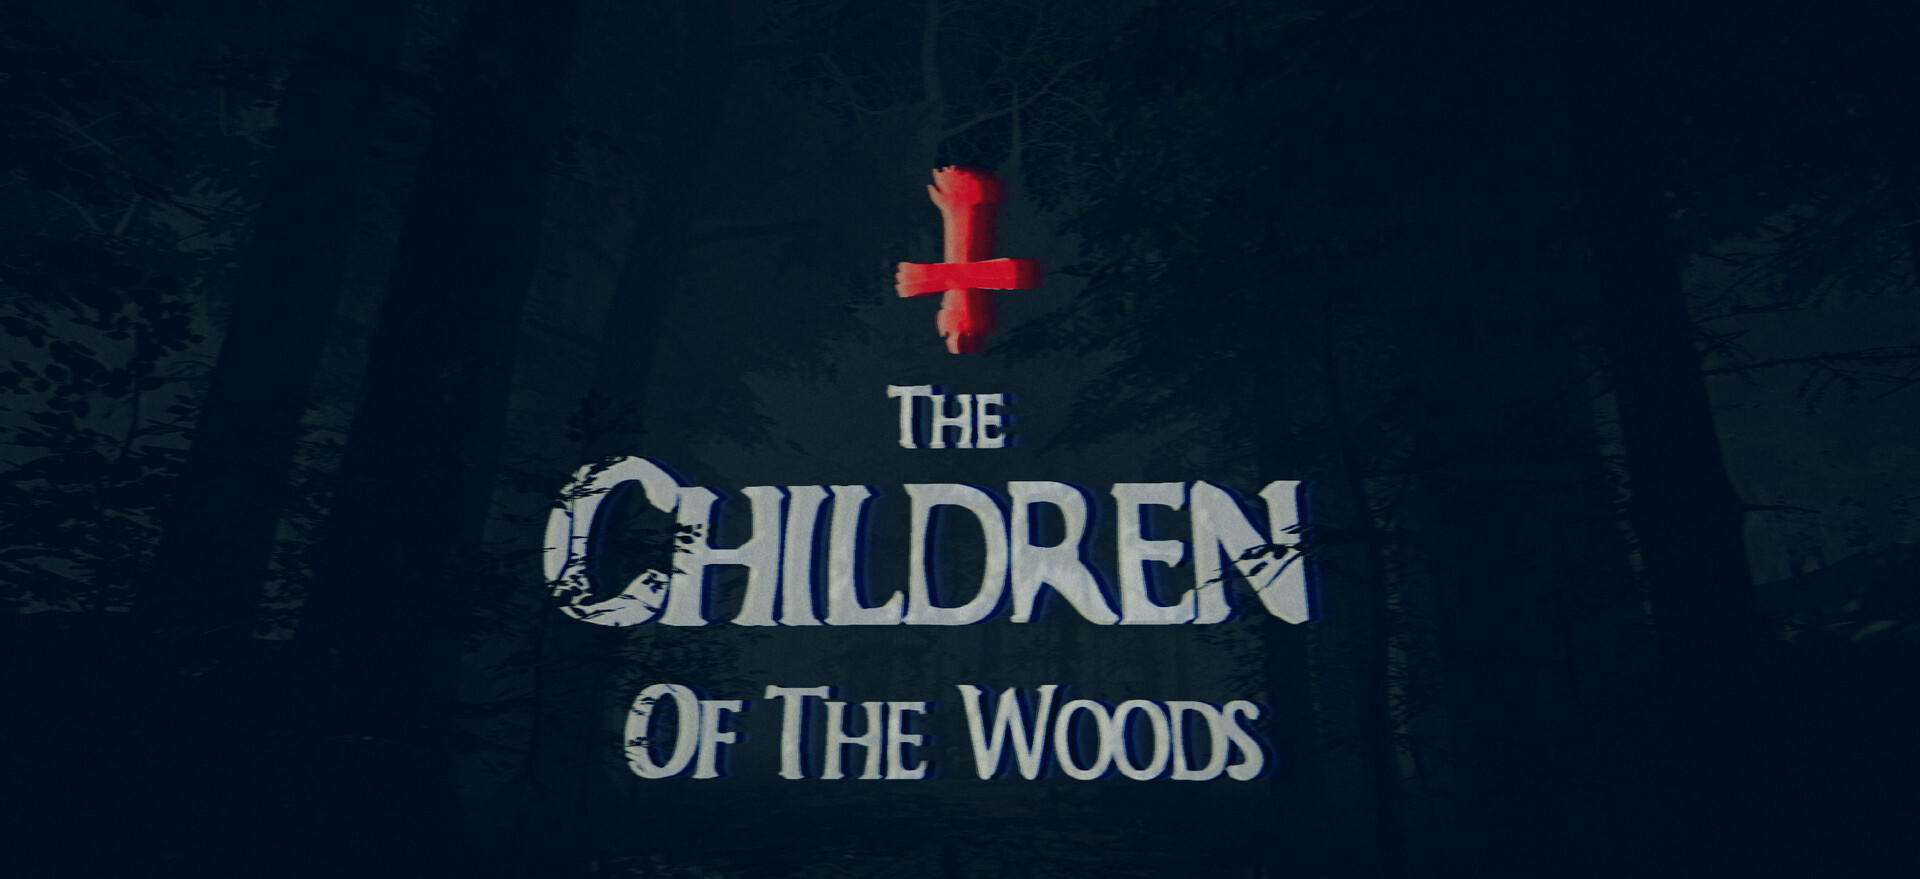 Screenshot 1 of The Children of The Woods - Lost Tape 